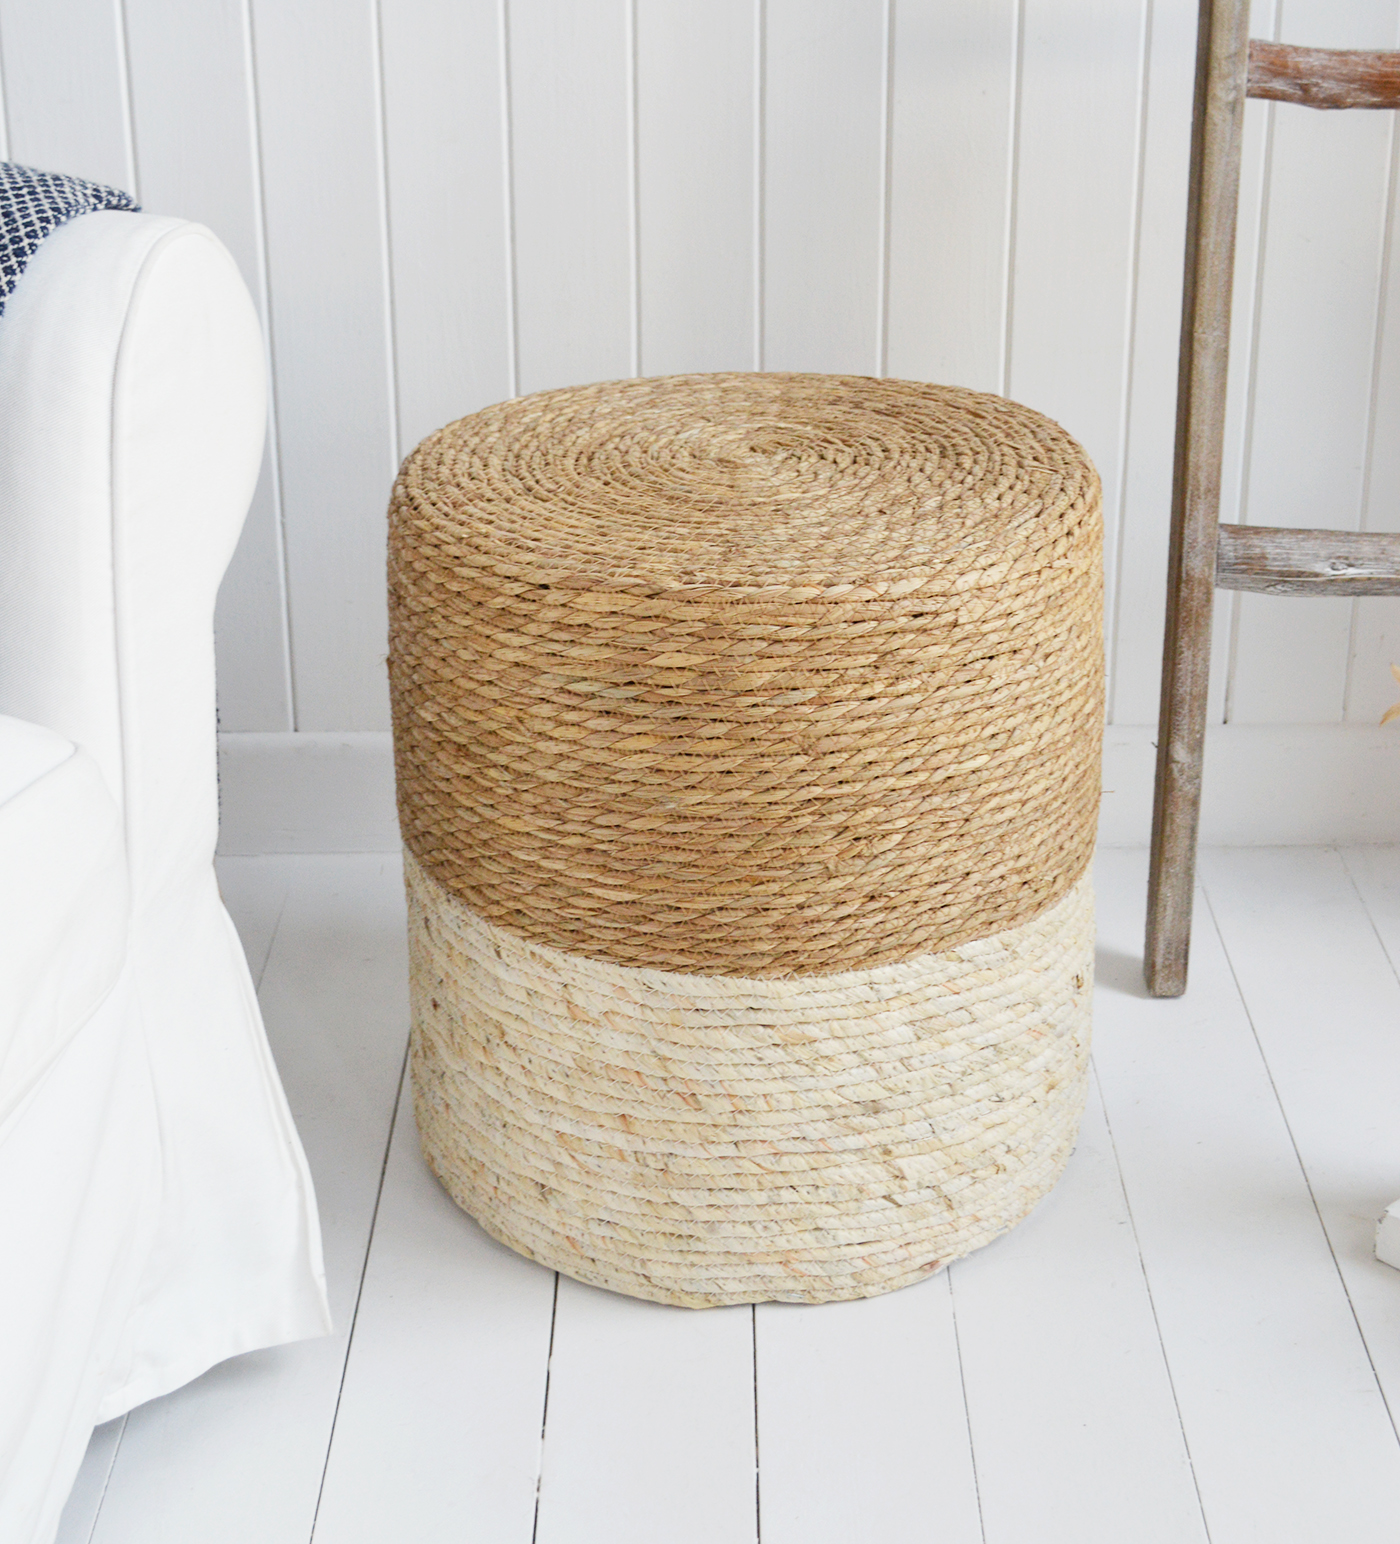 Fall River Stool or side table  - Ideal to add warmth with natural material in a coastal or New England living room interior decor from The White Lighthouse Furniture. Bathroom, Living Room, Bedroom and Hallway Furniture for beautiful homes